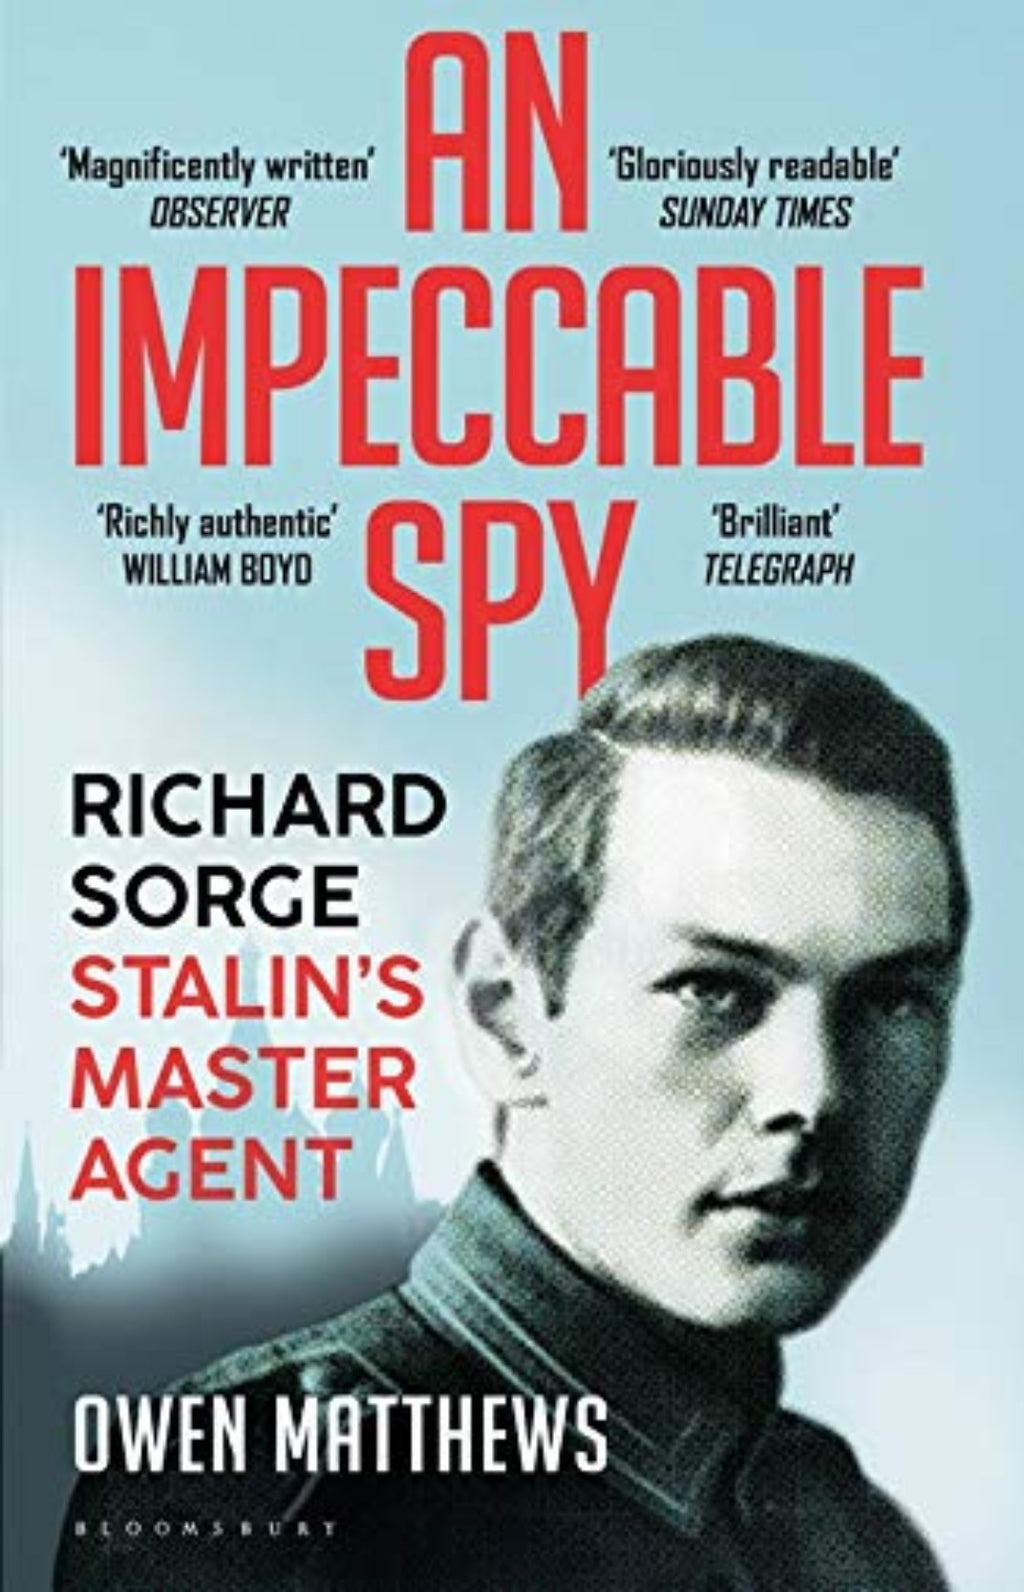 An Impeccable Spy : Richard Sorge, Stalin's Master Agent